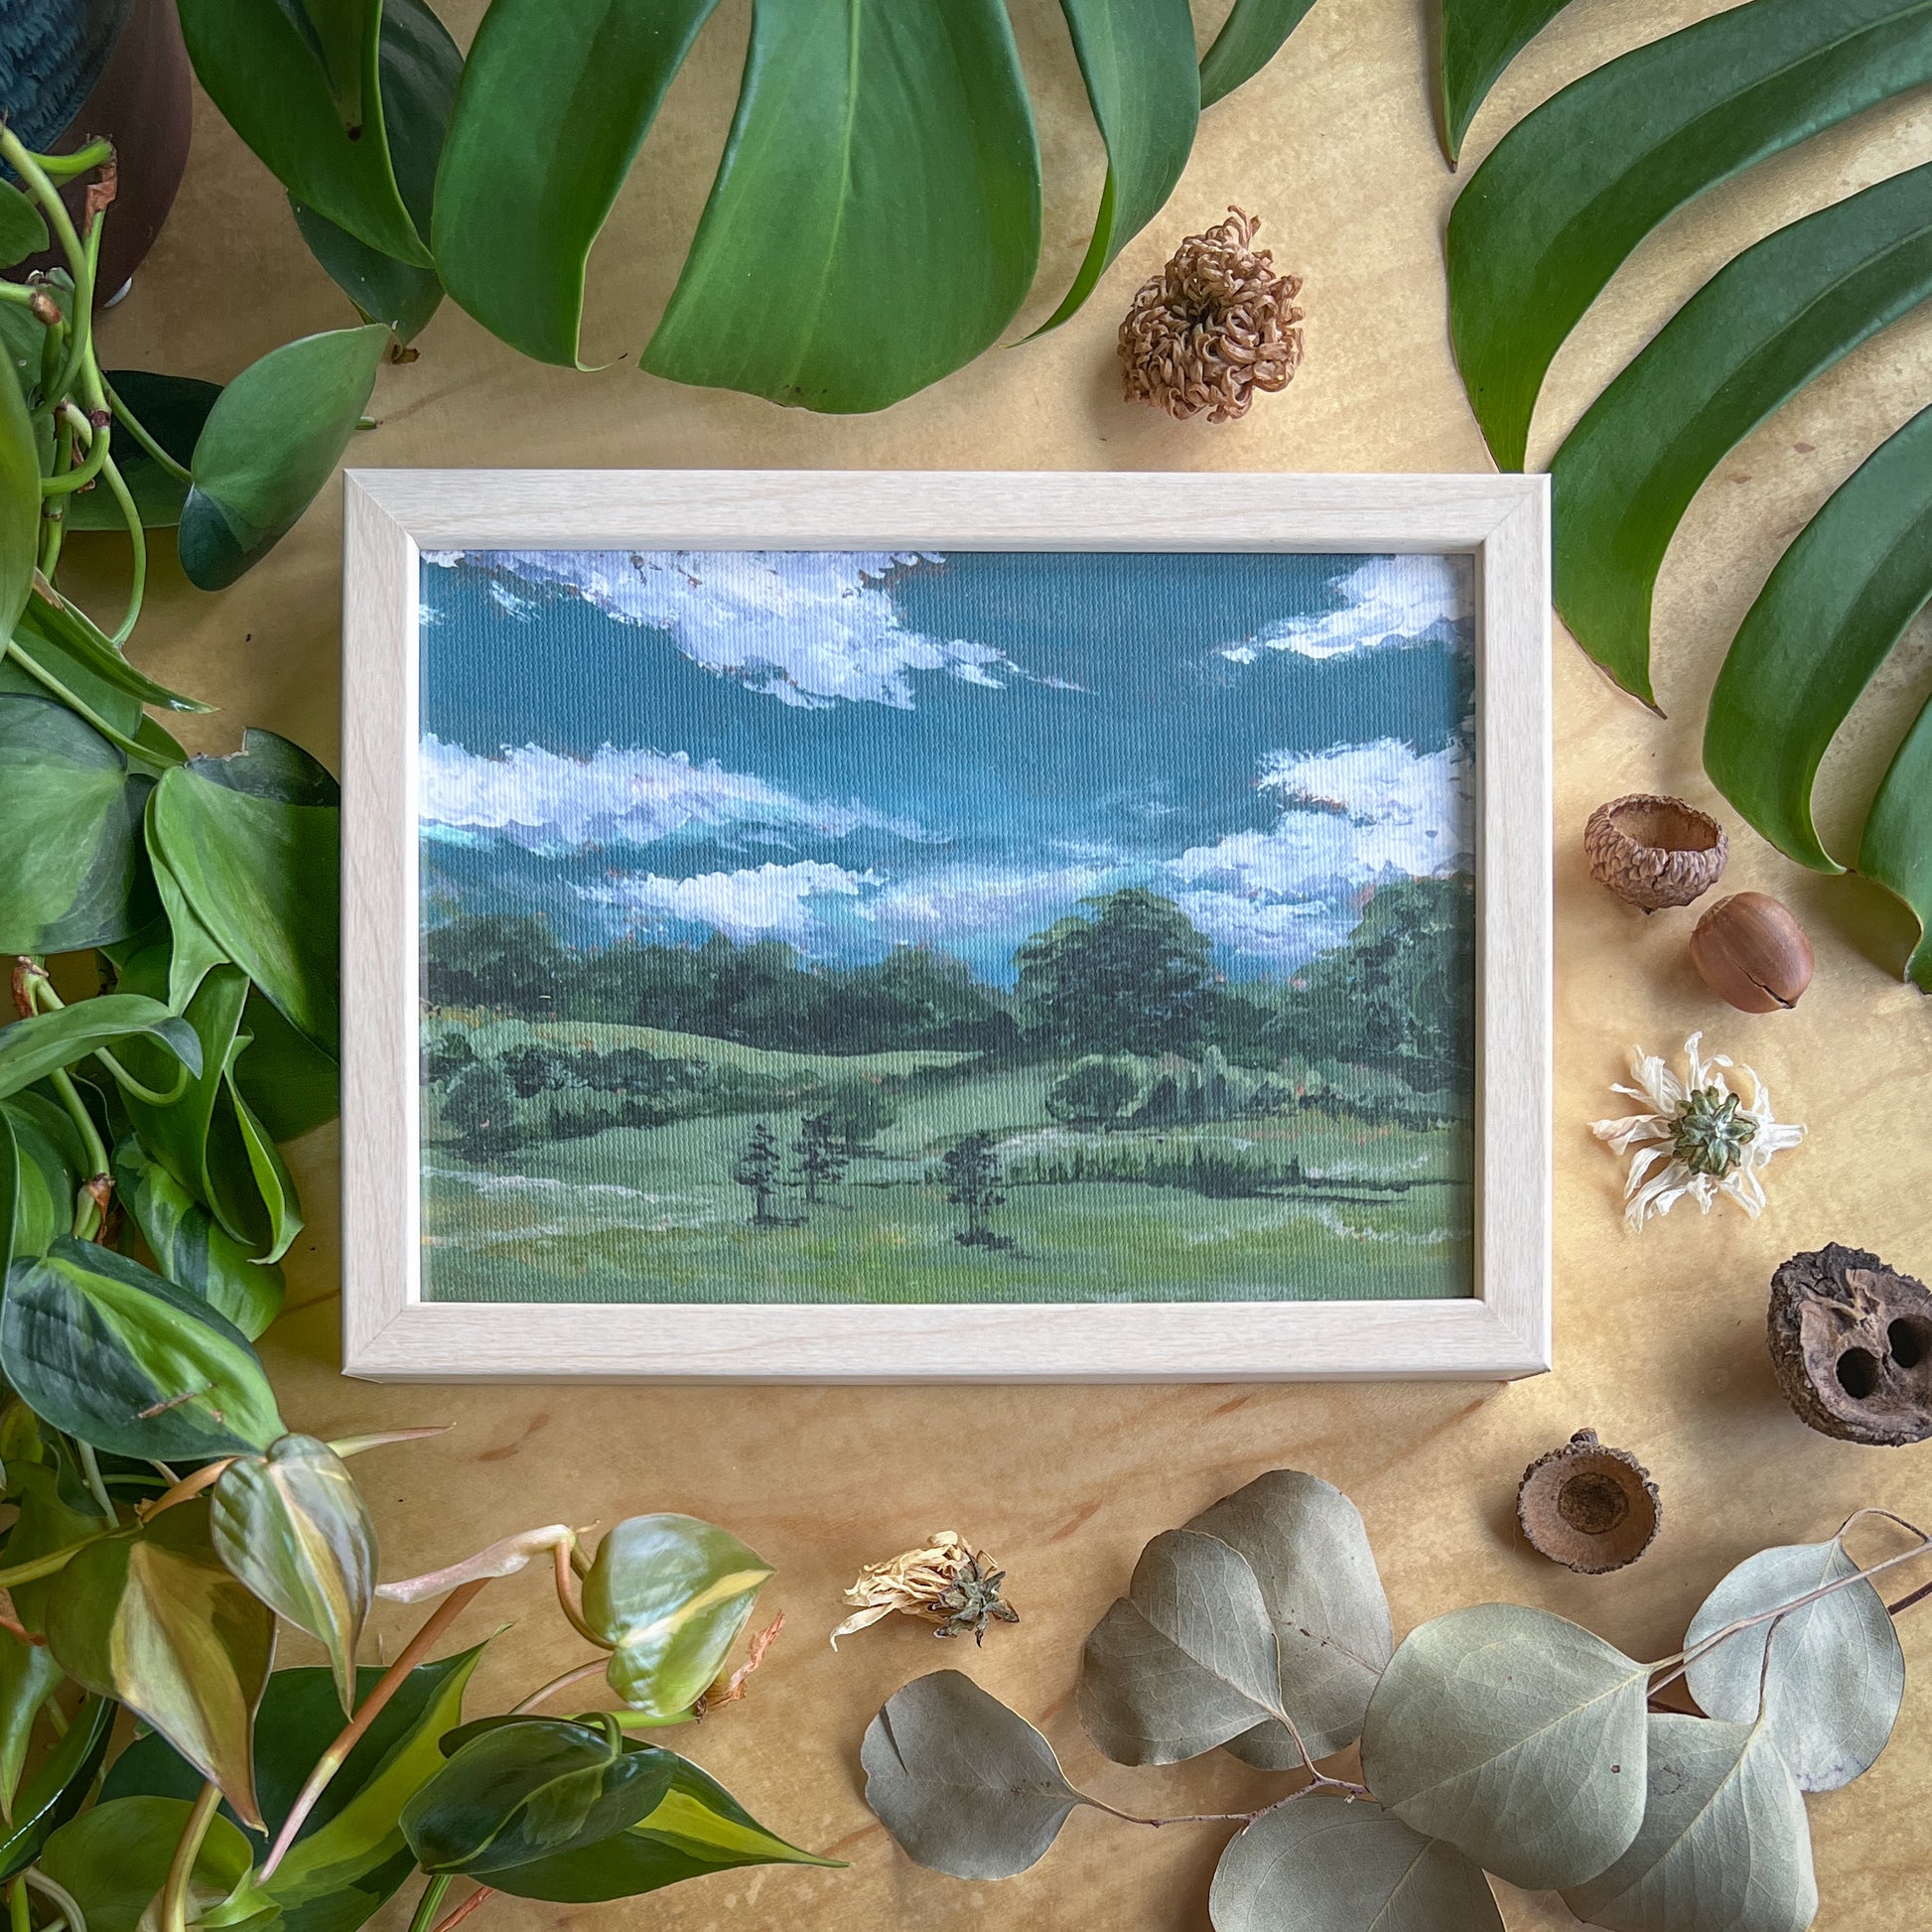 Canvas print of a landscape in a light wood frame displayed on a wood table with plants and other natural items scattered around it